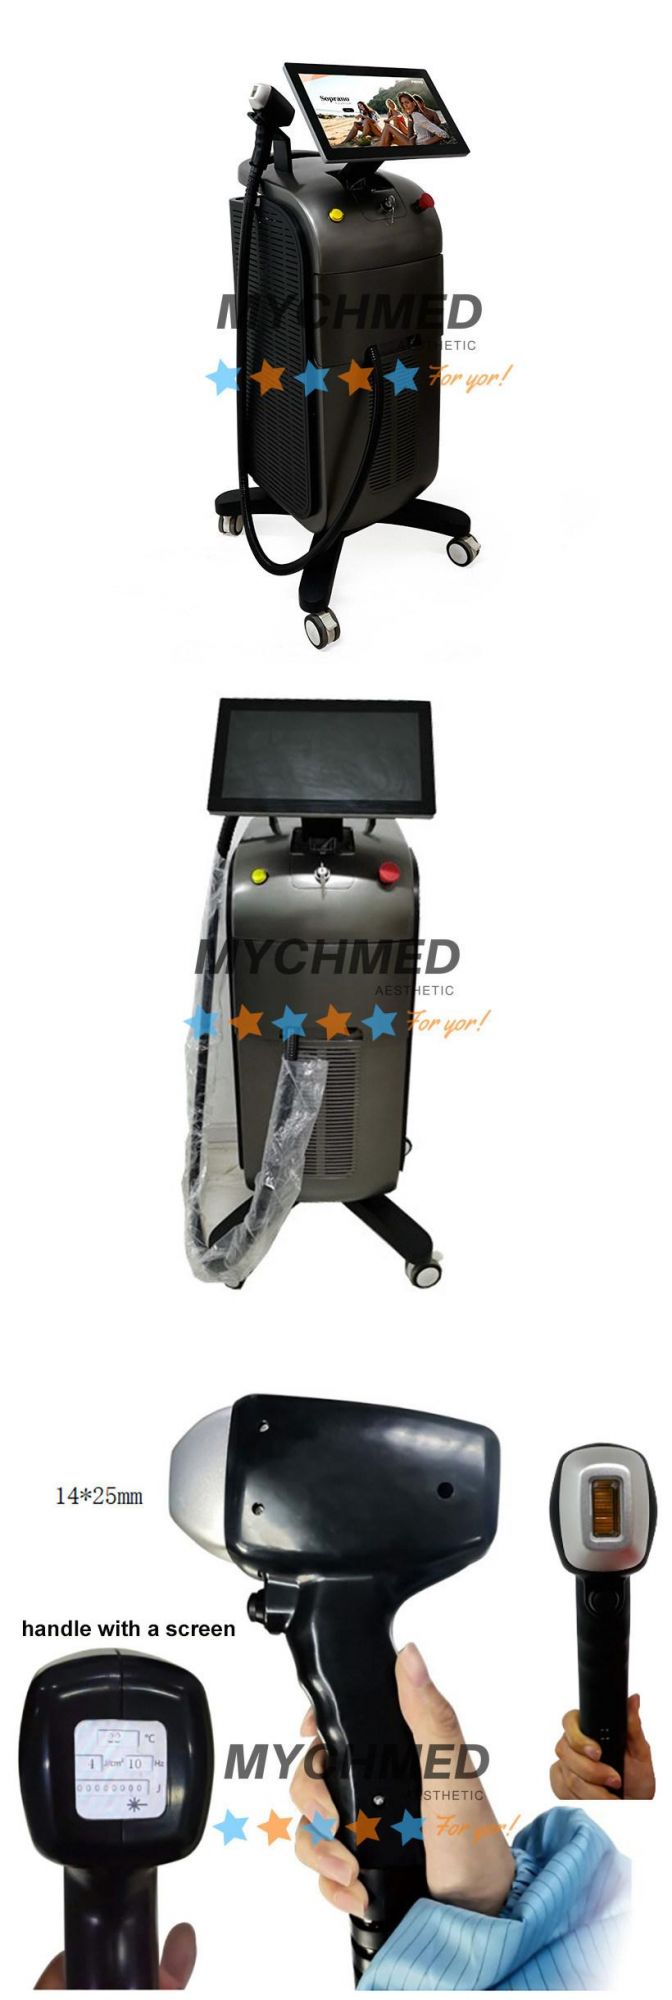 755nm 810nm 1064nm Soprano Diode Laser 3 Triple Wave Hair Removal Beauty Equipment